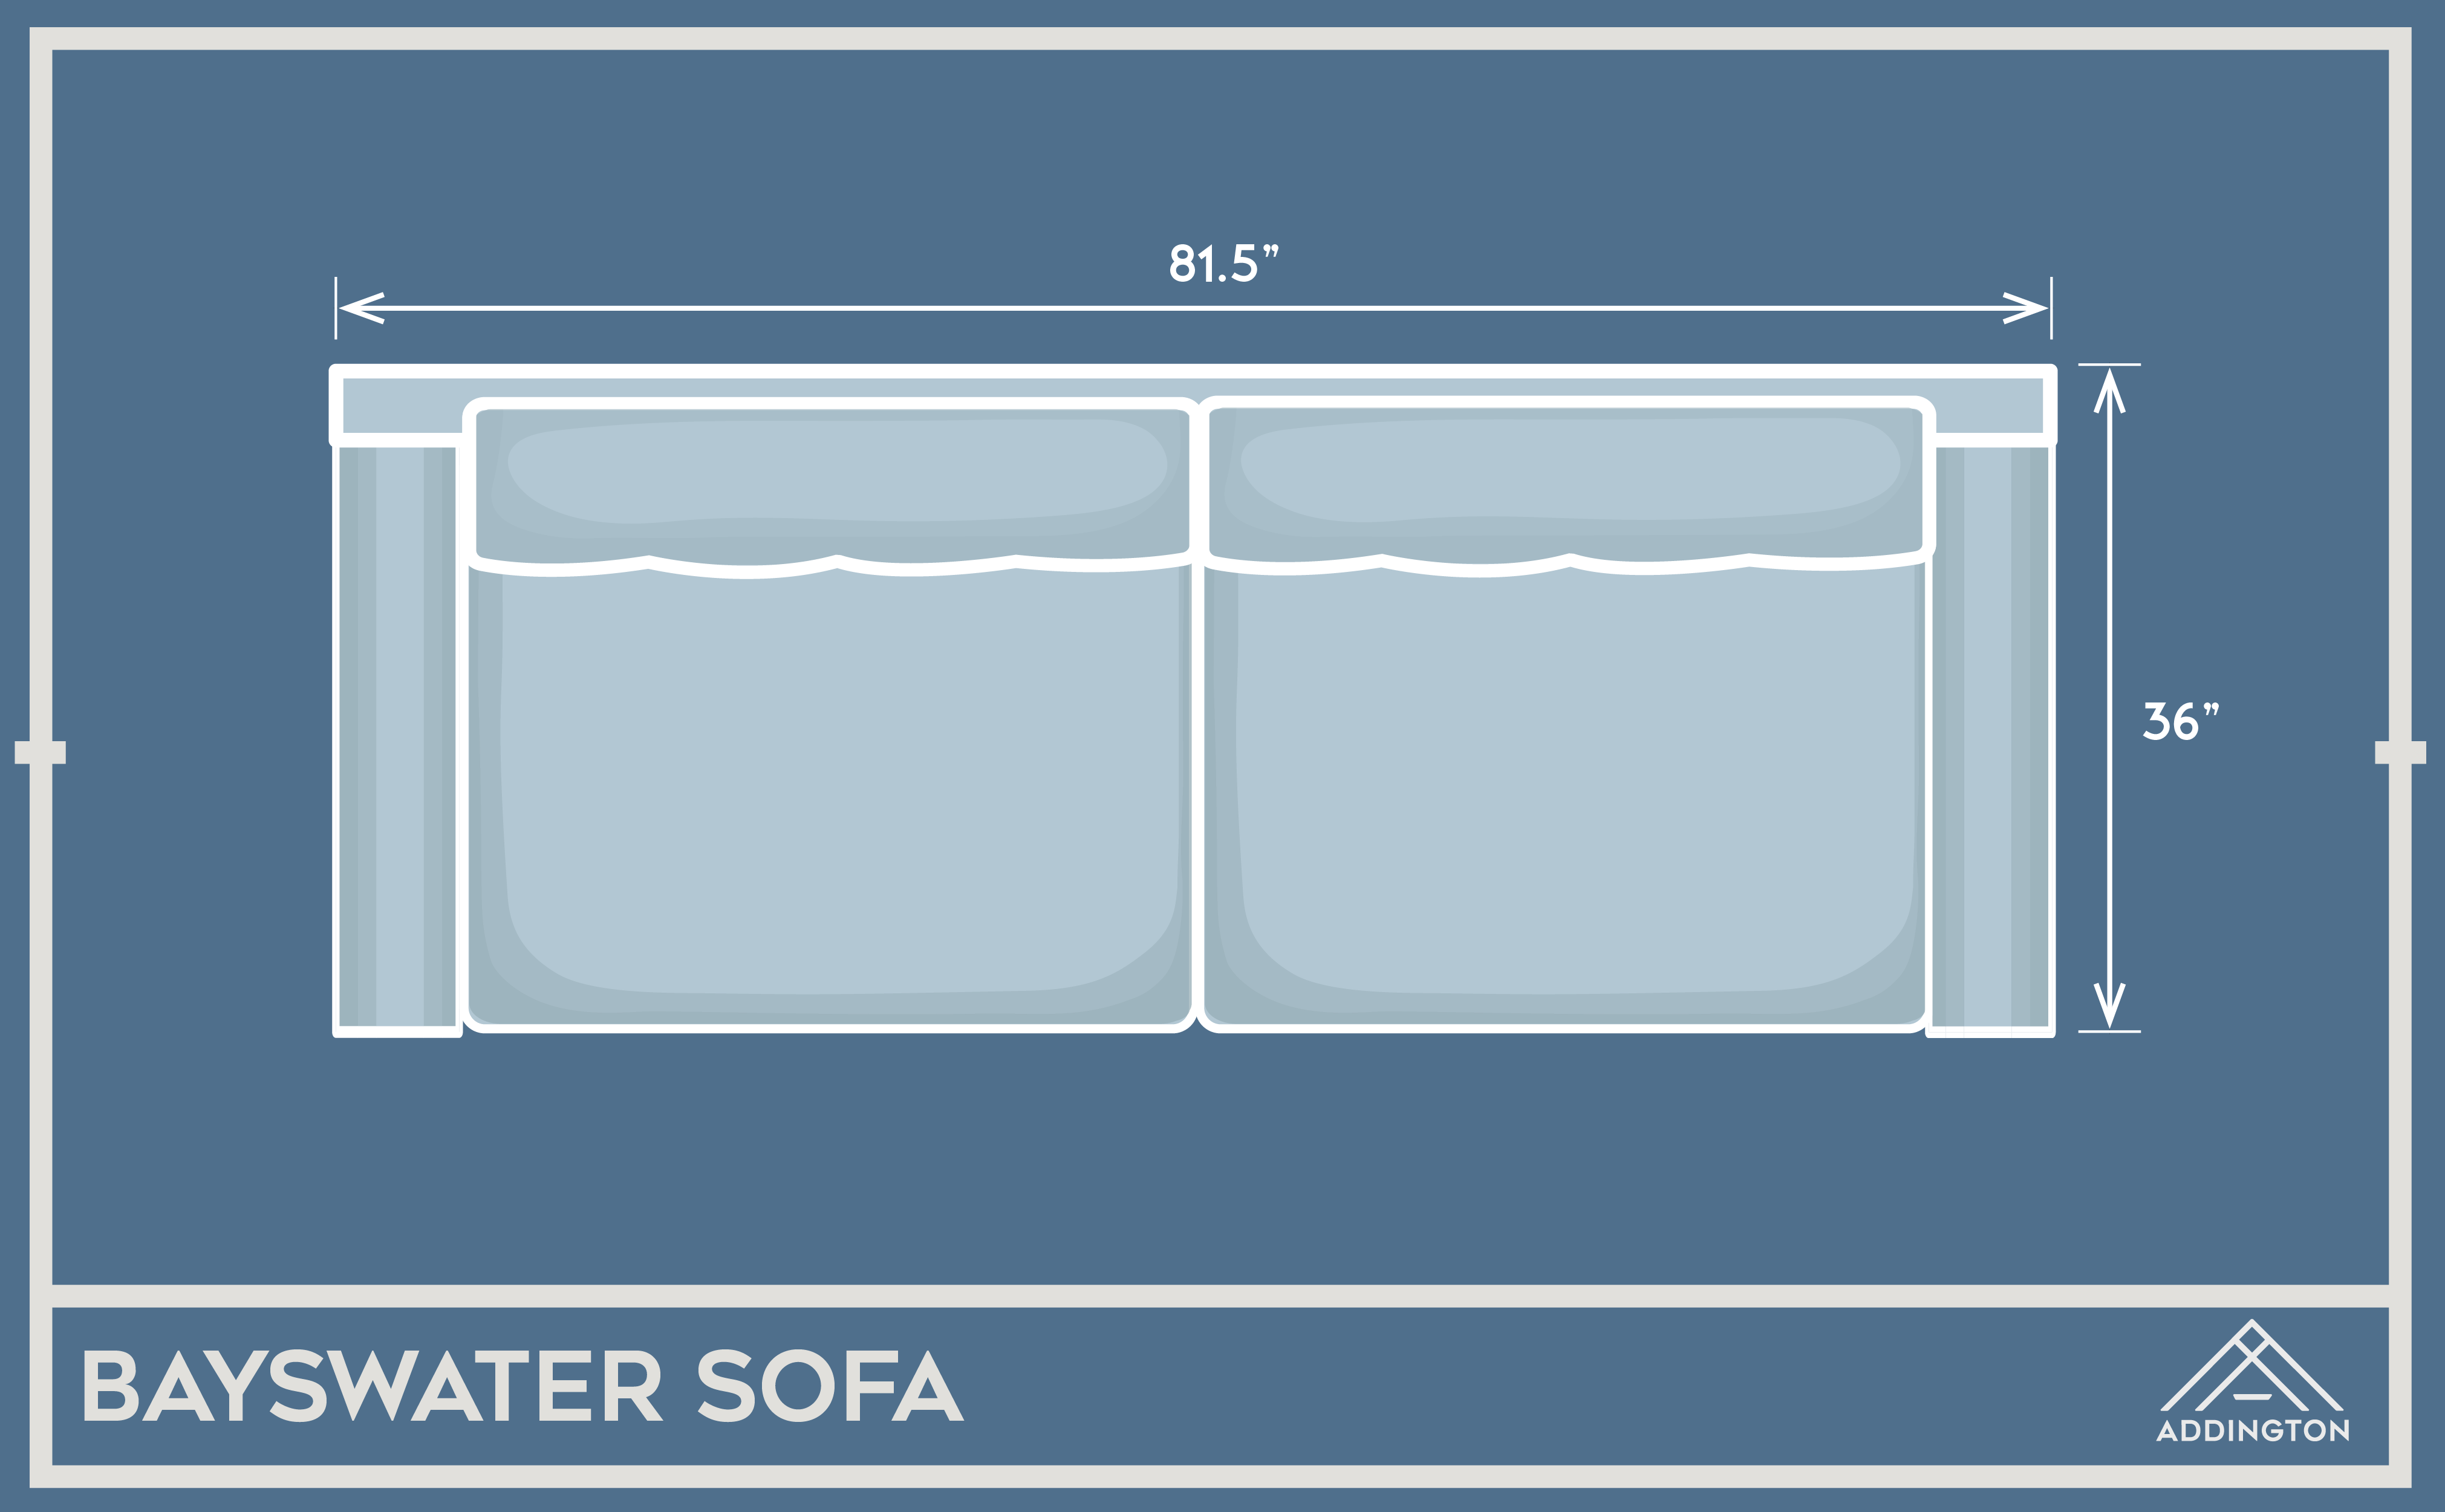 baywater sofa rectangle apluse.png__PID:23e8f473-d71d-4e87-b2d1-96cba9df7bfb